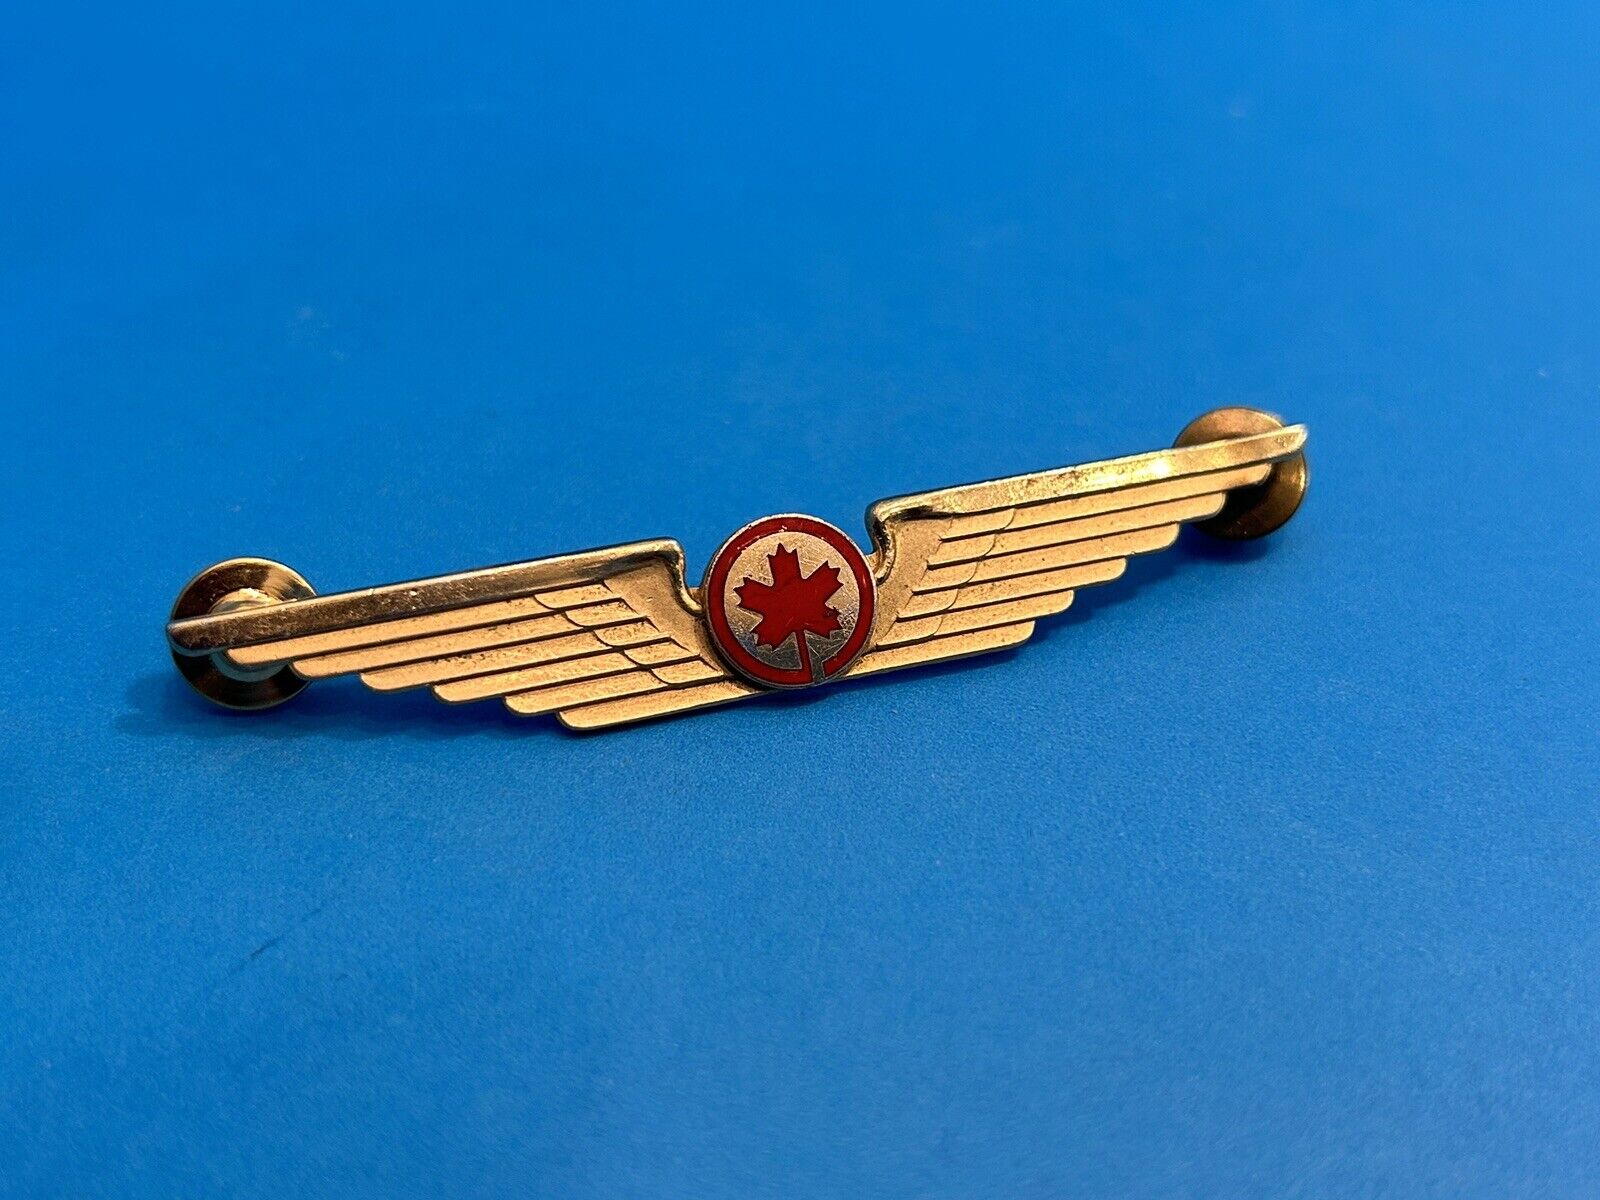 Air Canada Airline Pilots Wings For 2nd Officer Flight Engineer By Bond Boyd